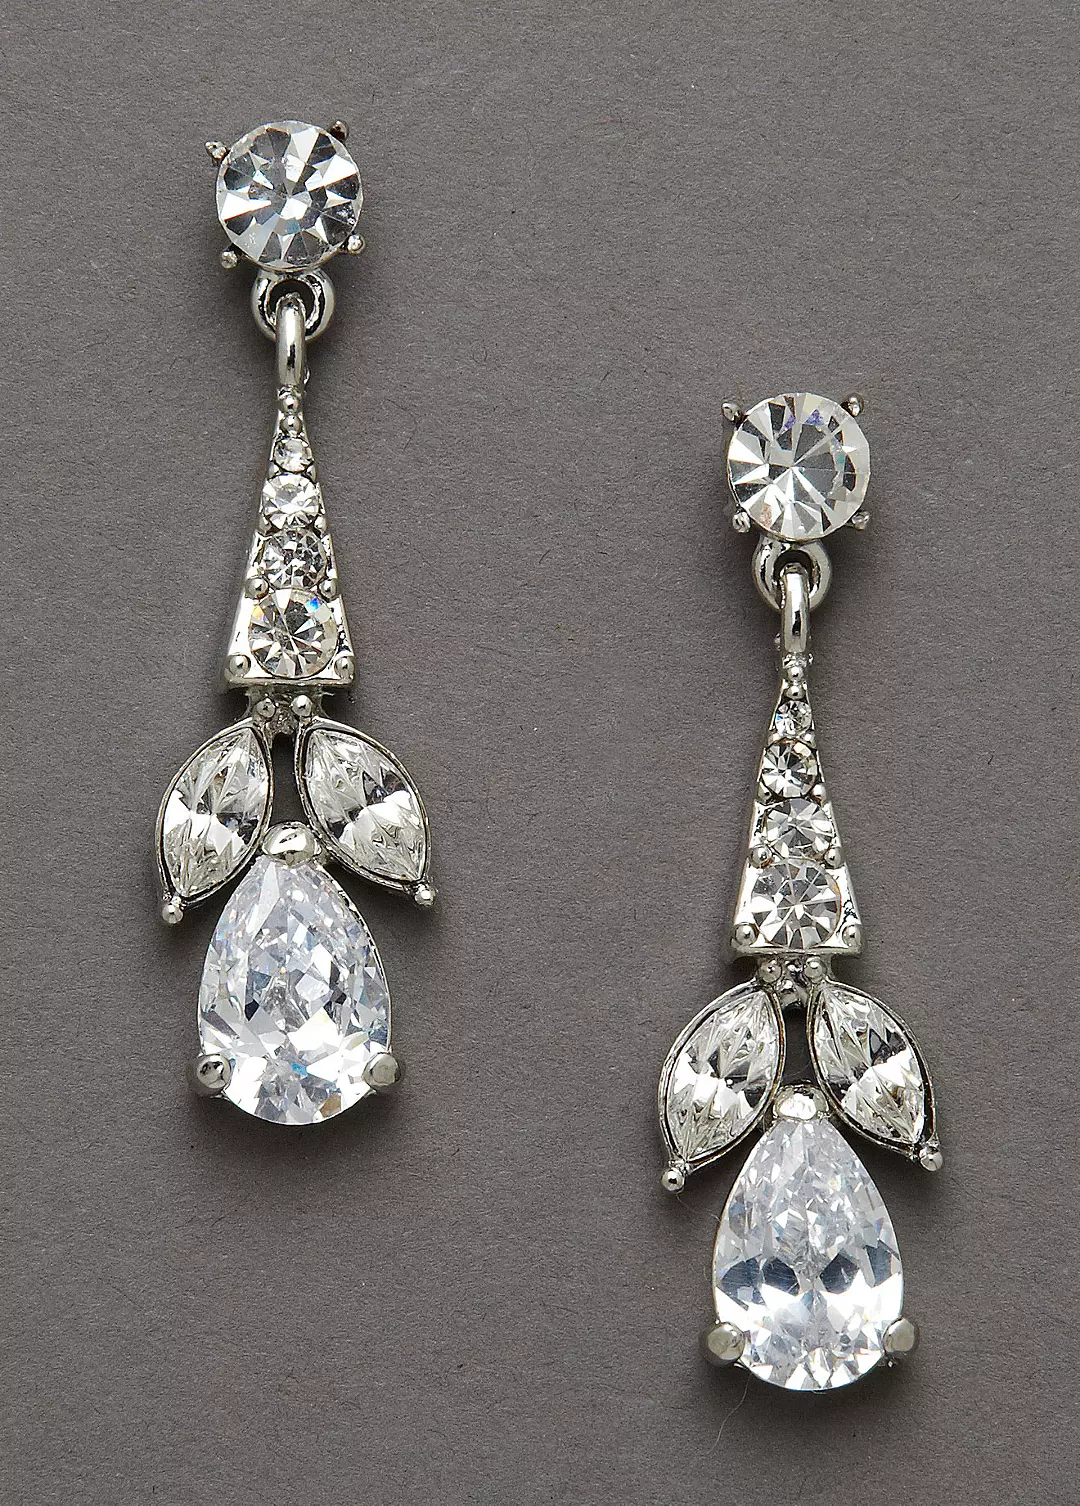 Crystal Earrings with Pear Shaped Stones Image